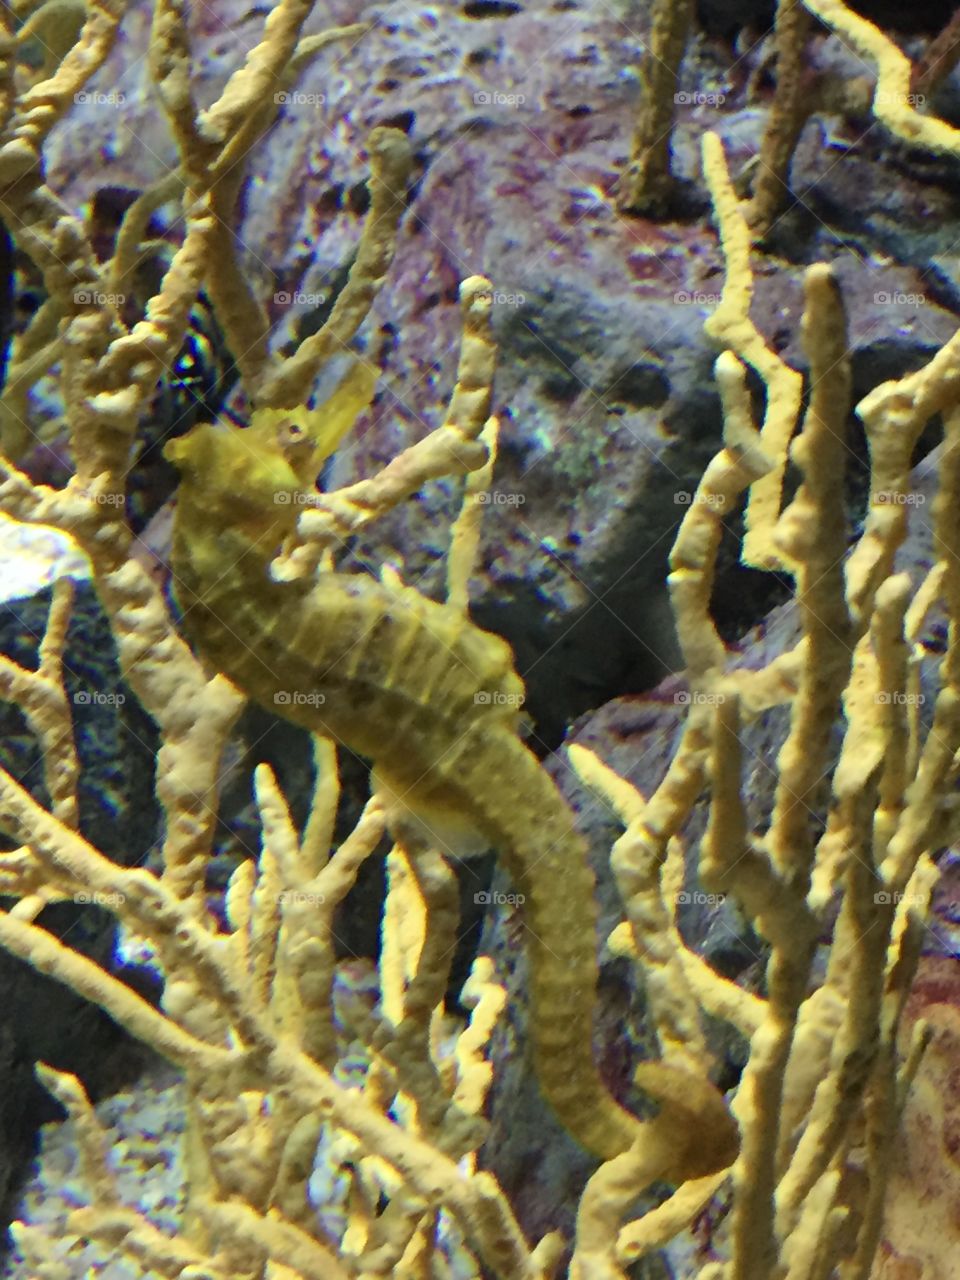 Seahorse camouflage 